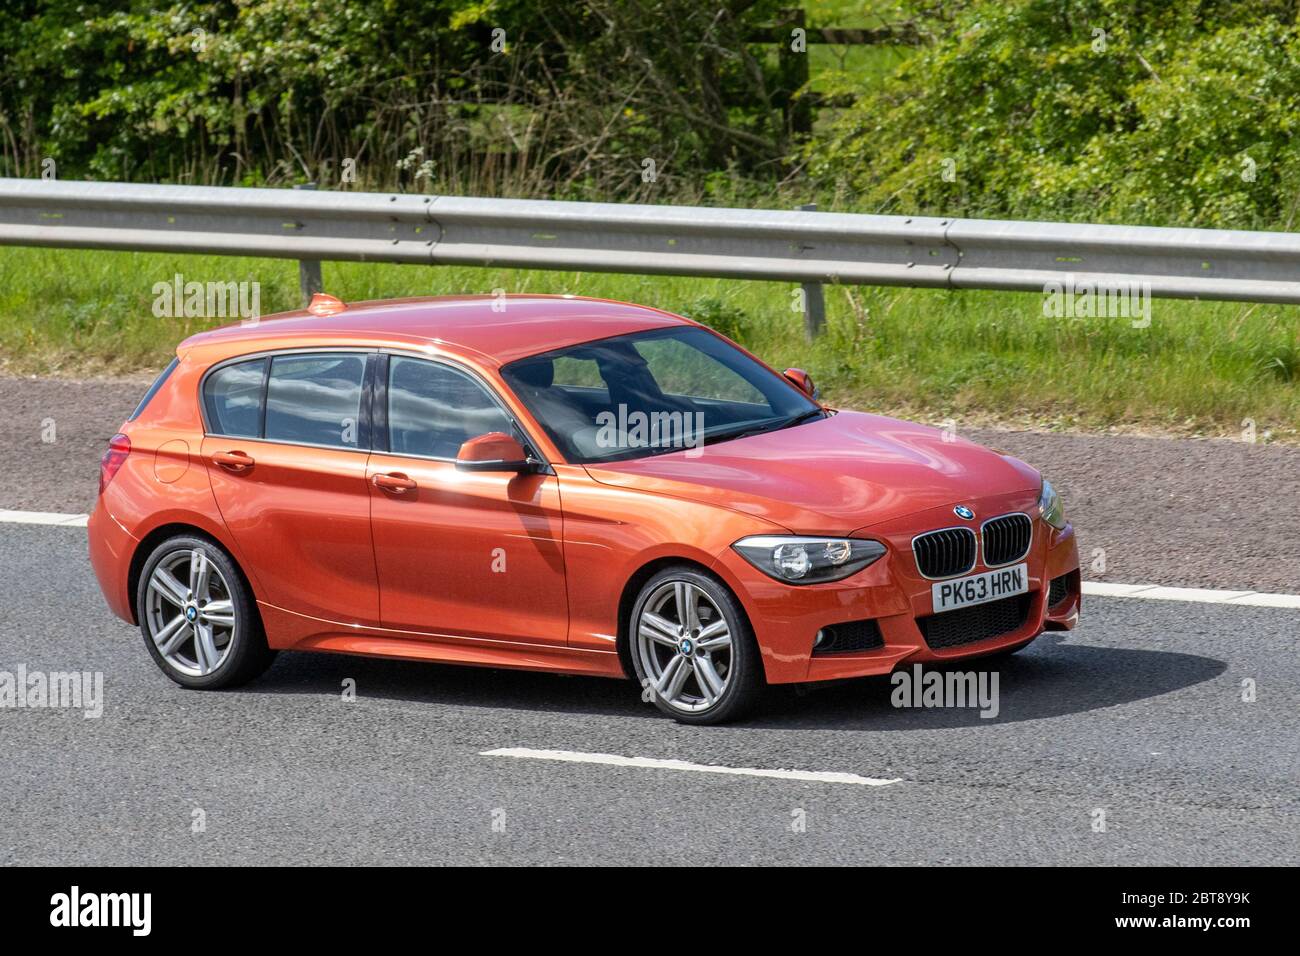 2013 orange BMW 116I M Sport; Vehicular traffic moving vehicles, cars driving in England, travelling vehicle on UK roads, motors, motoring, motorists on the M6 motorway highway in Manchester. Stock Photo